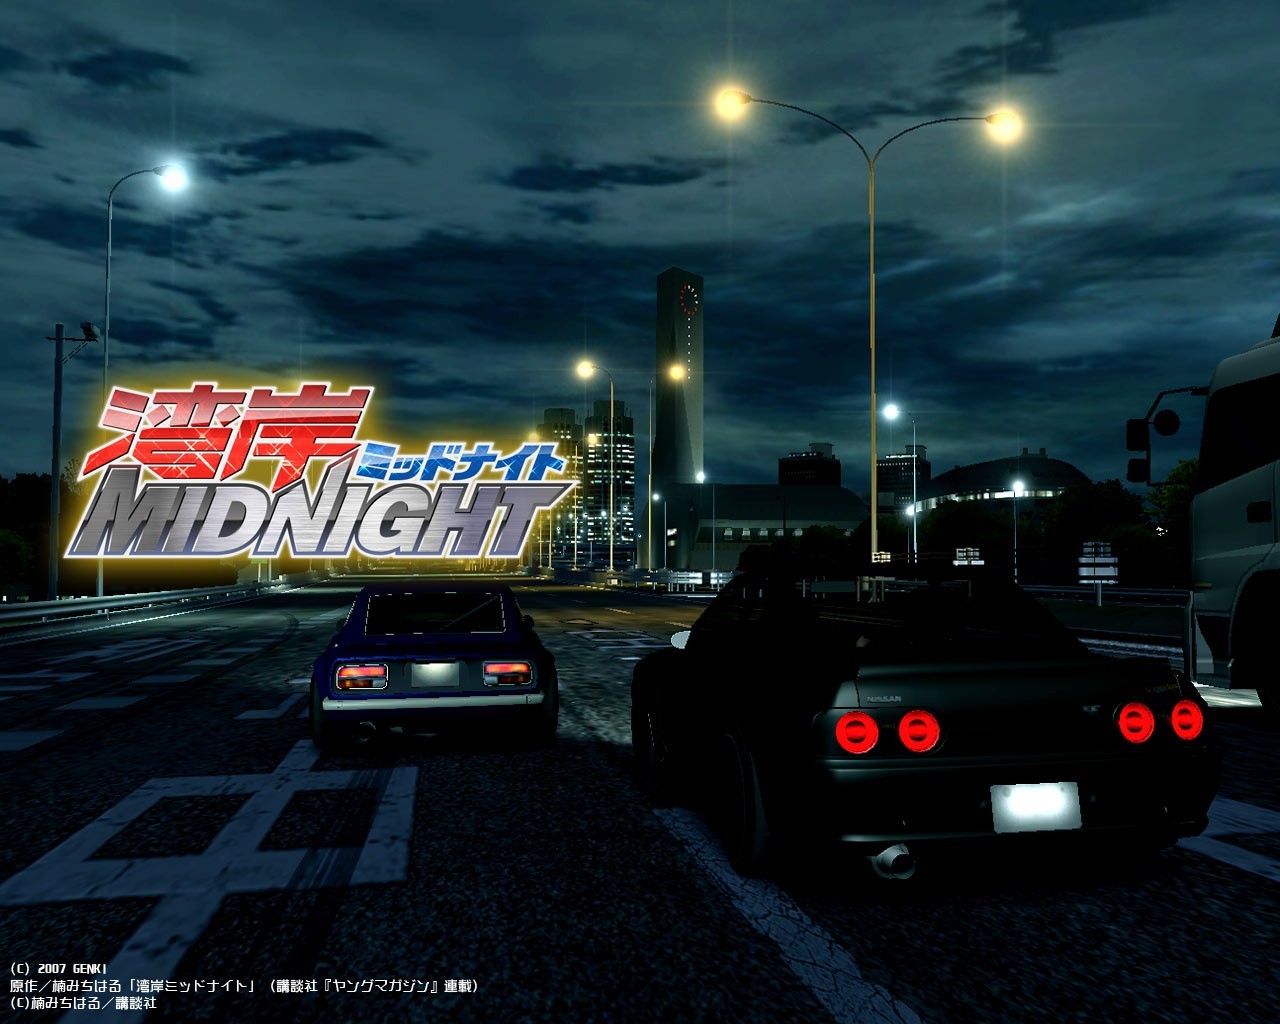 Listen to Wangan Midnight Maximum Tune 5DX  Entry Maxi5DX by Nakushinta  in Anime favorites playlist online for free on SoundCloud